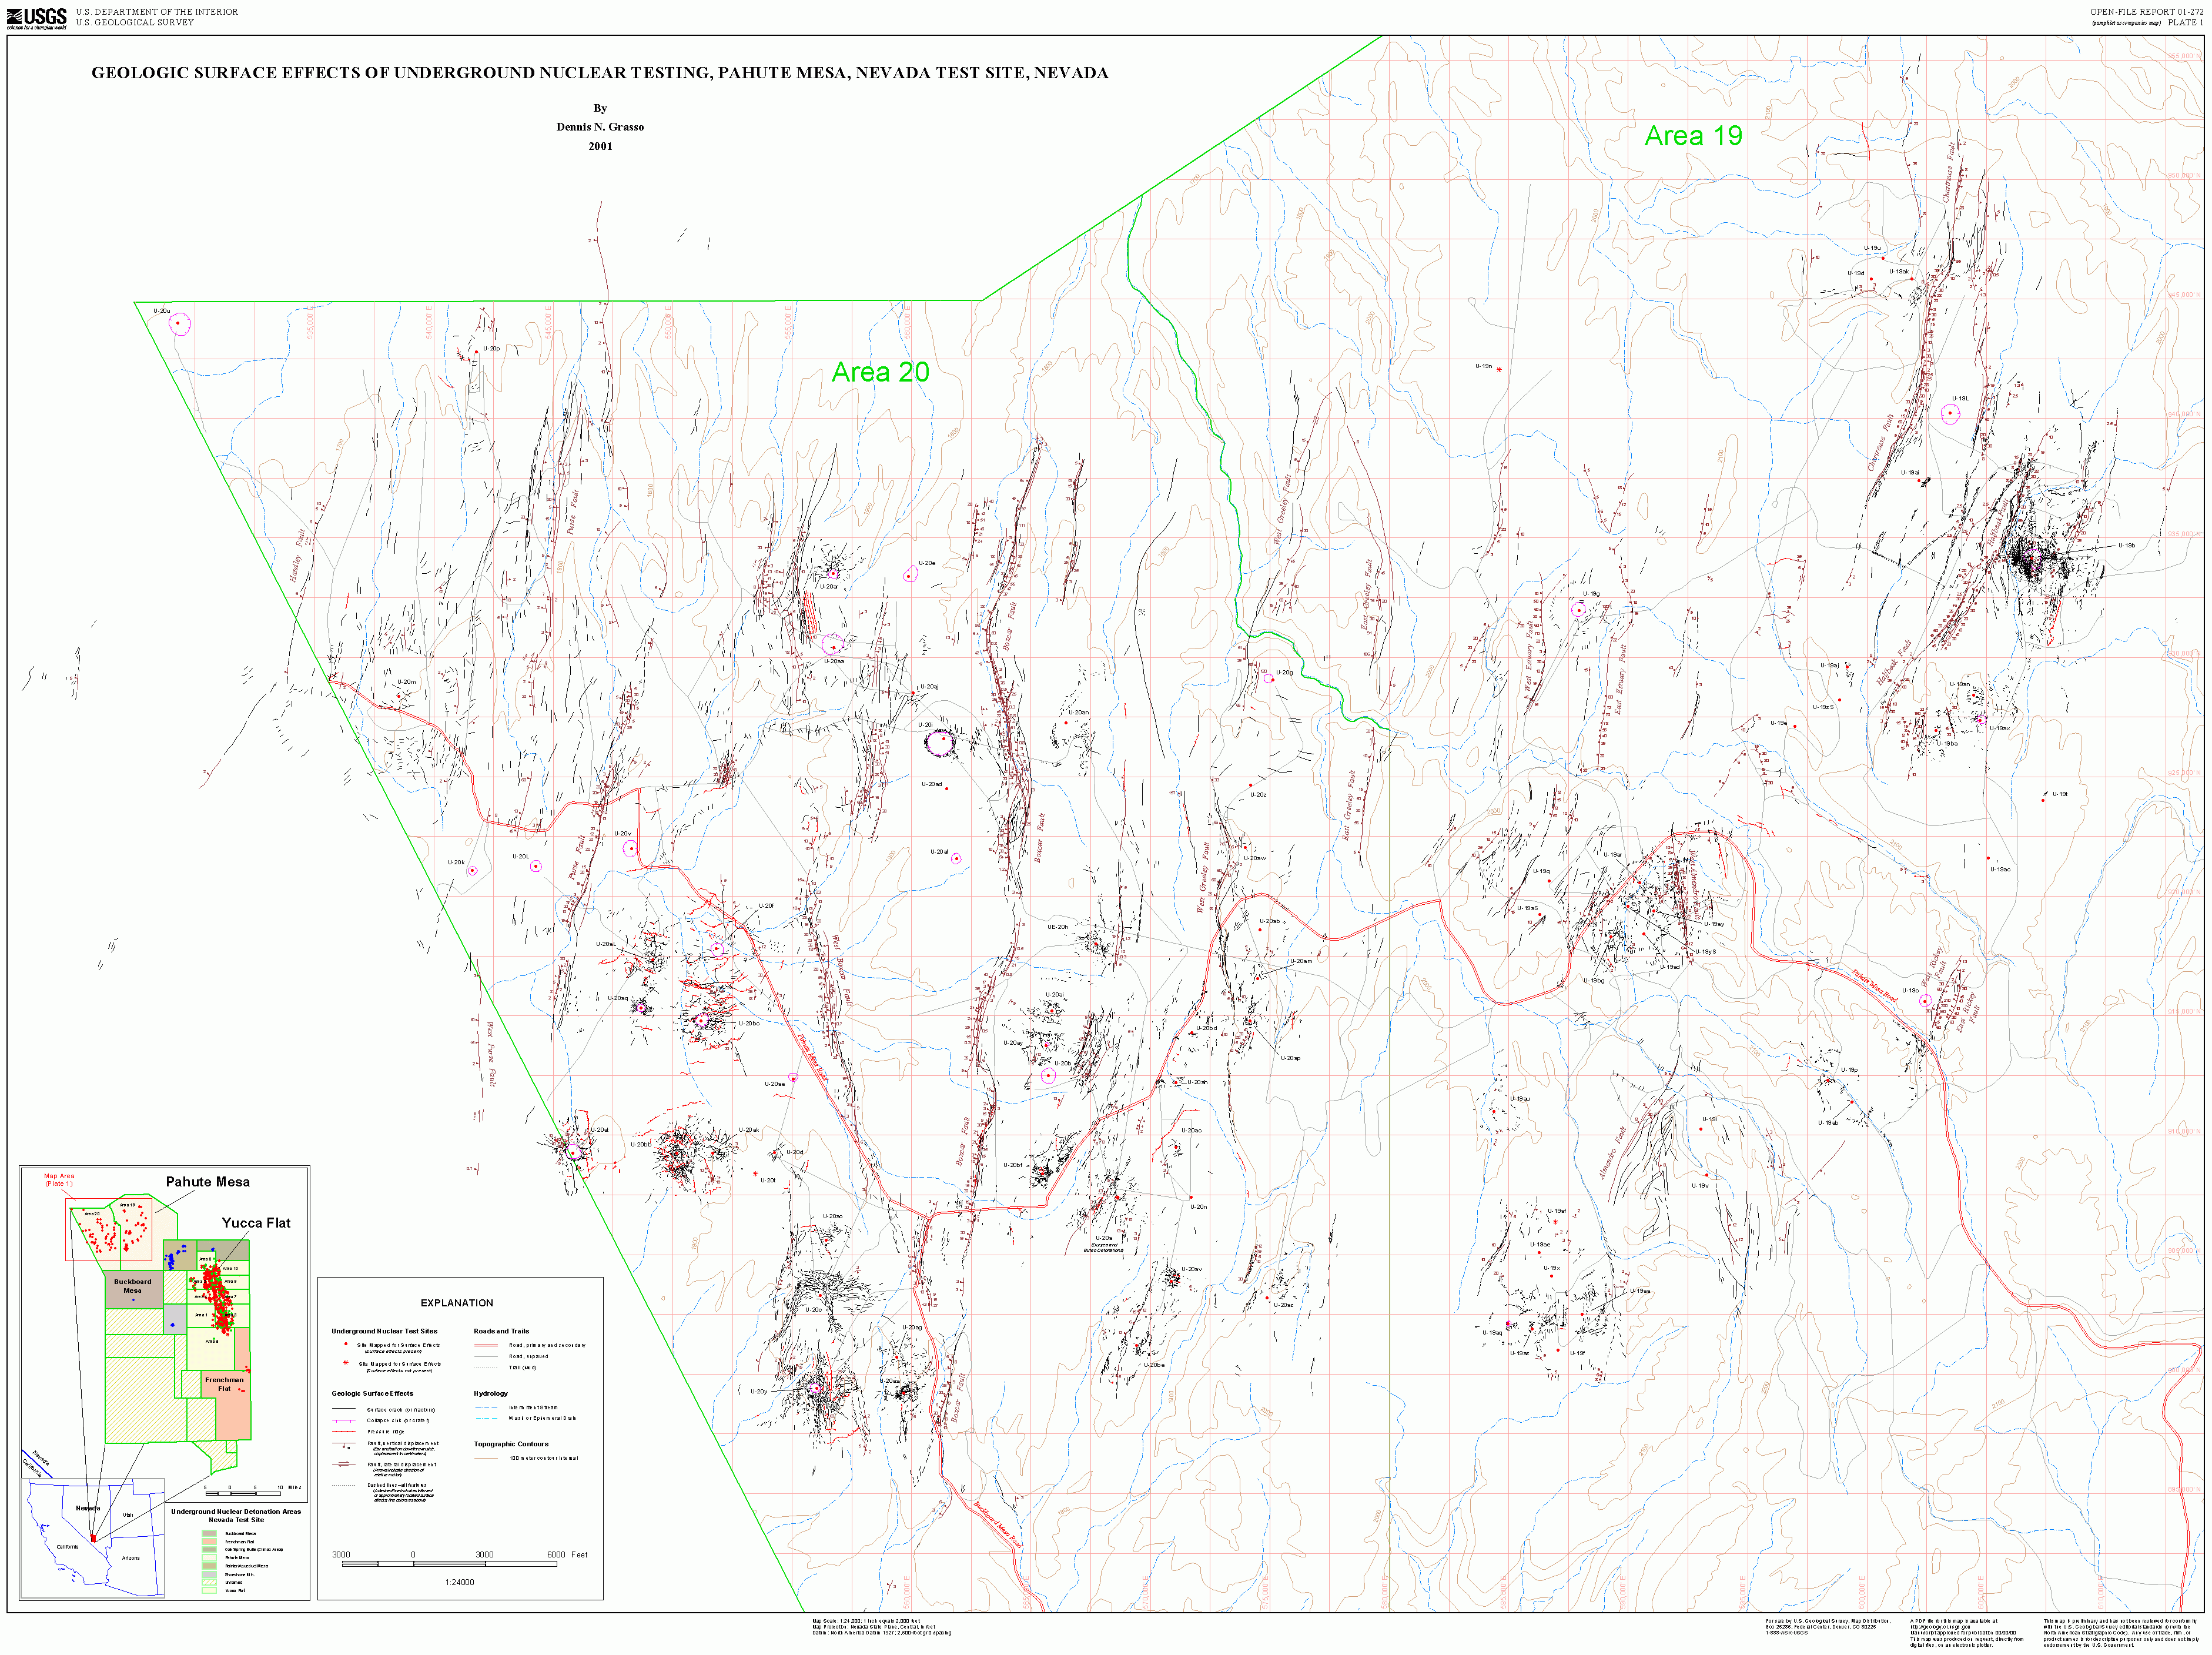 Pahute Mesa GIS Surface Effects Map (Plate 1)